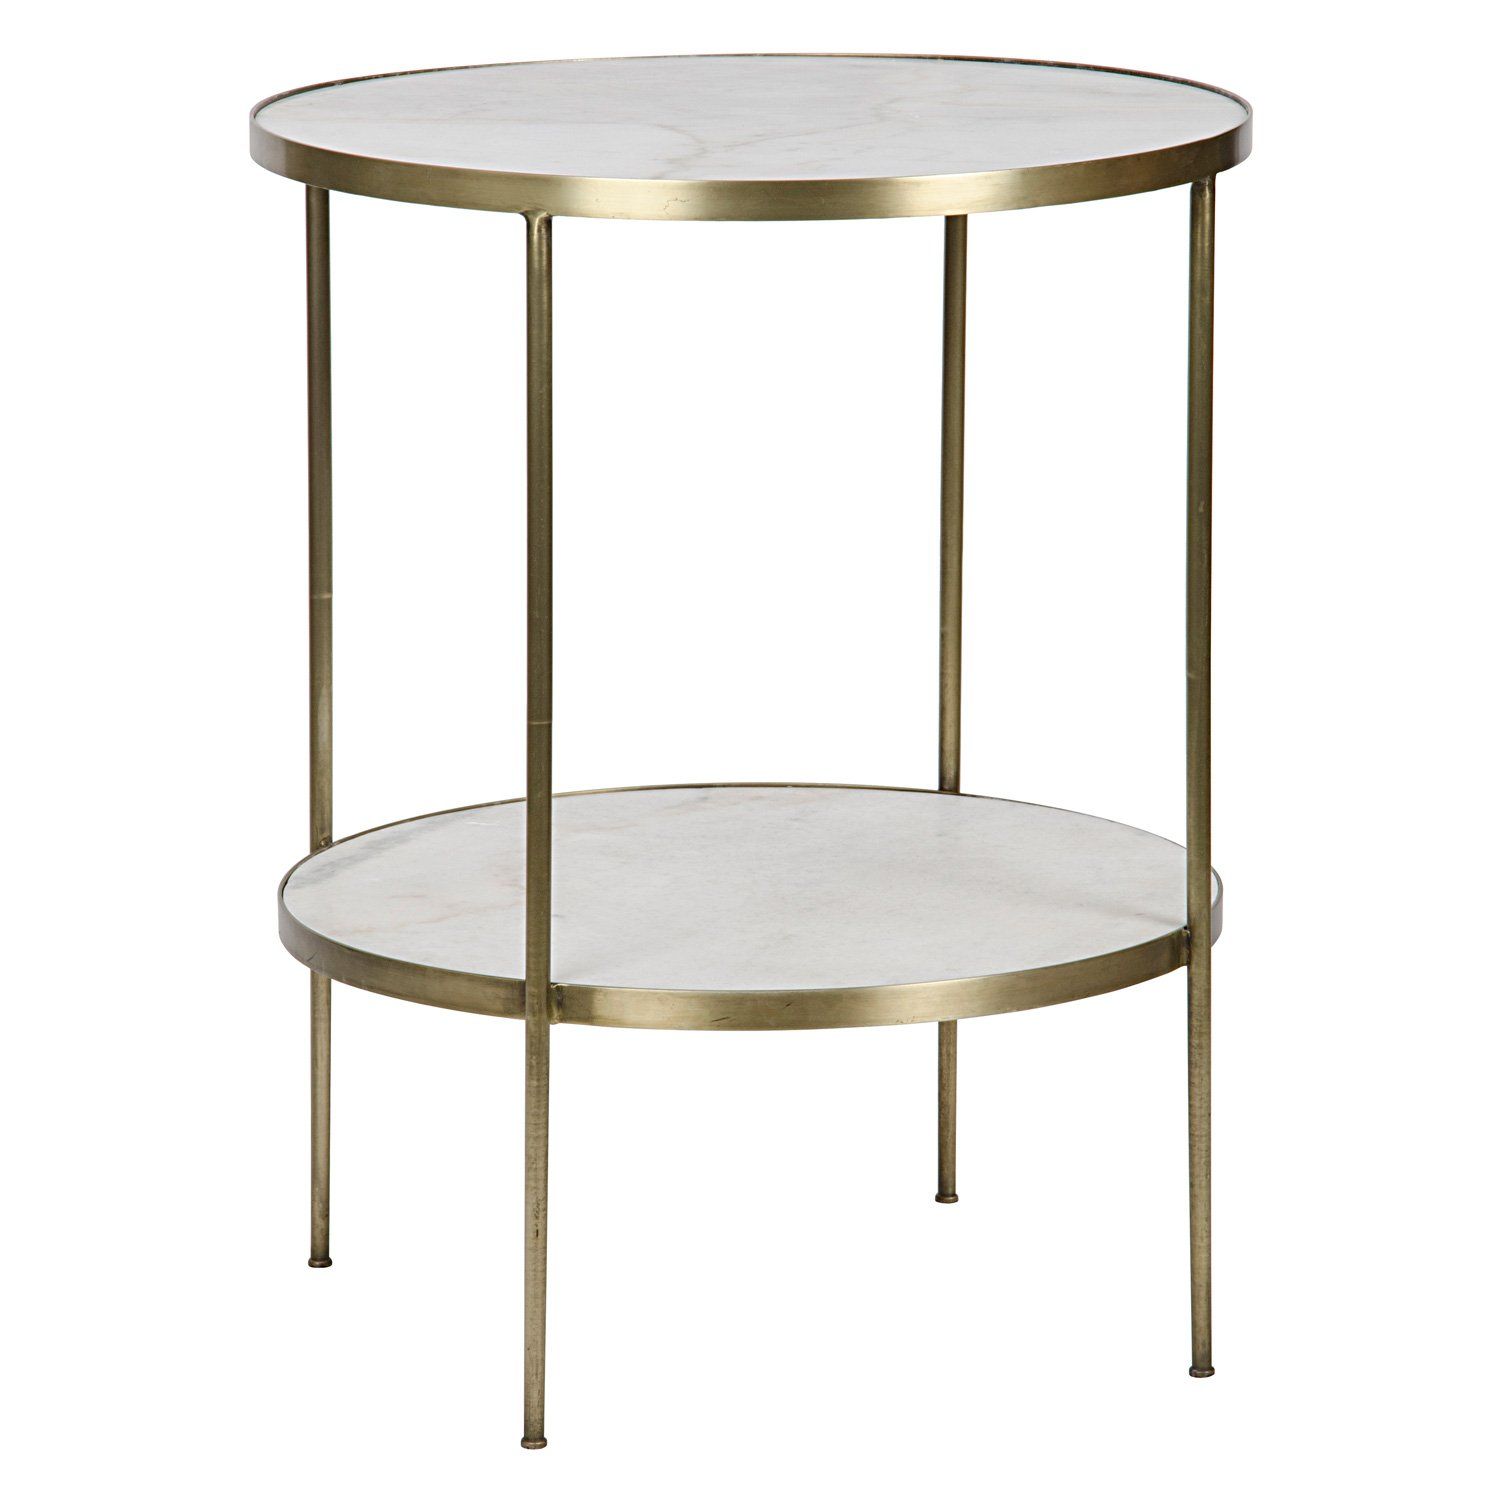 noir rivoli side table products brass furniture round accent lamps asian design kitchen sofa style bedside marble lamp small cover exterior door threshold united wine cabinet grey